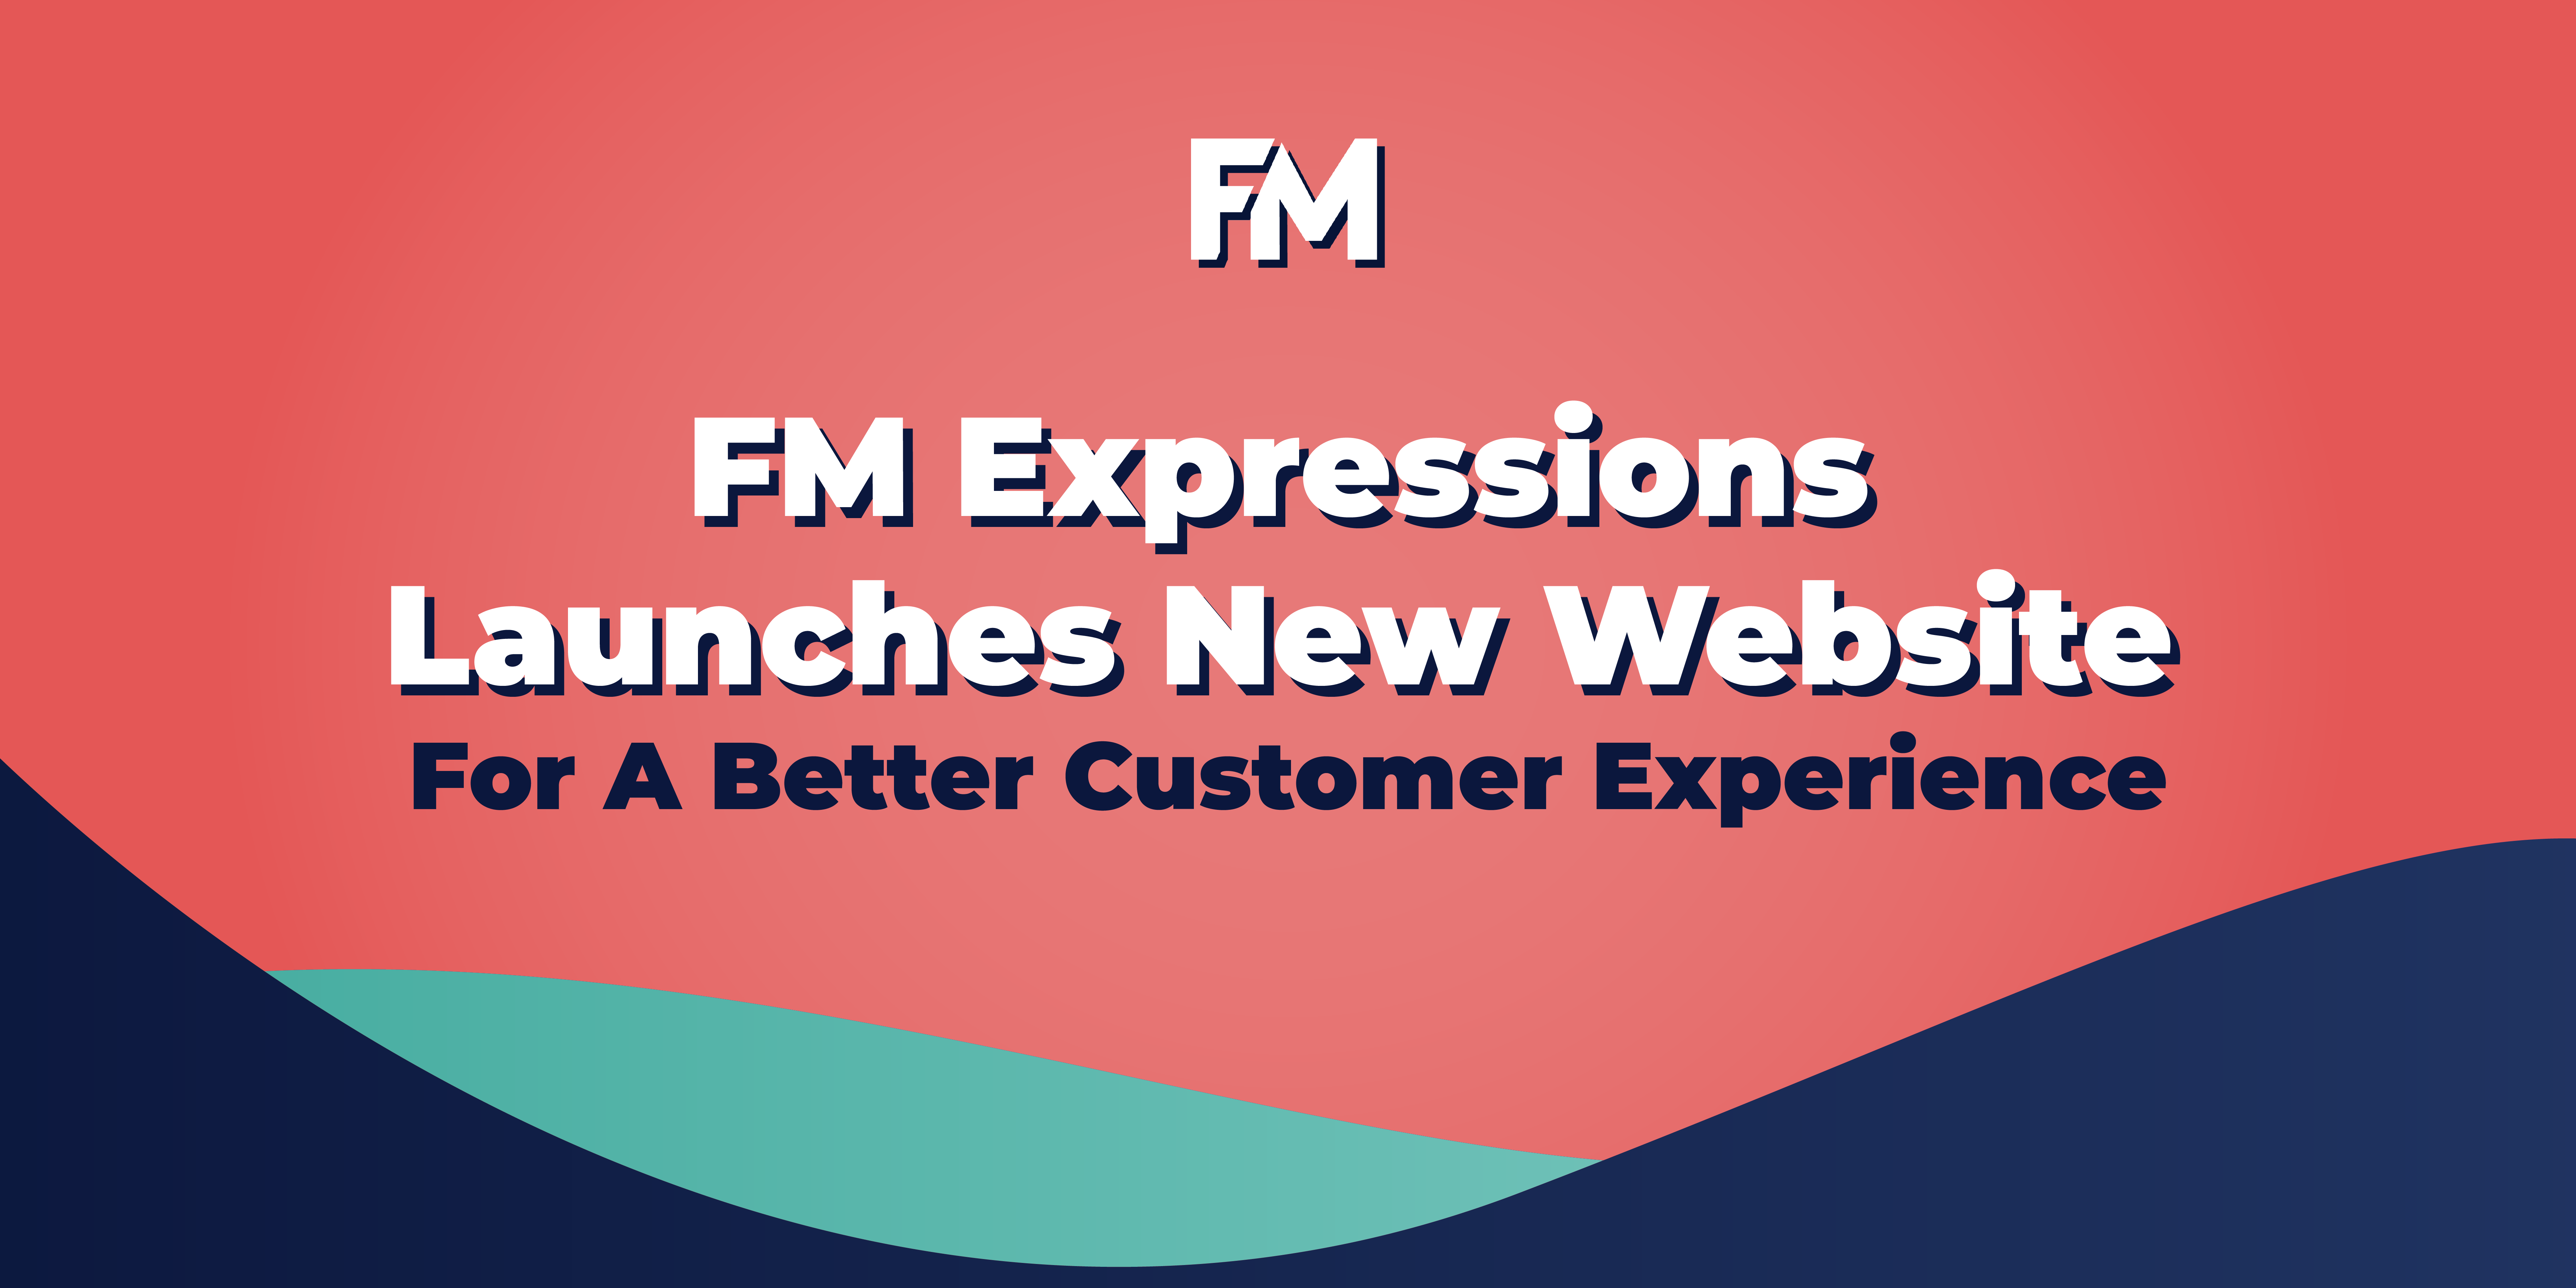 FM Expressions Launches A New Website For A Better Customer Experience